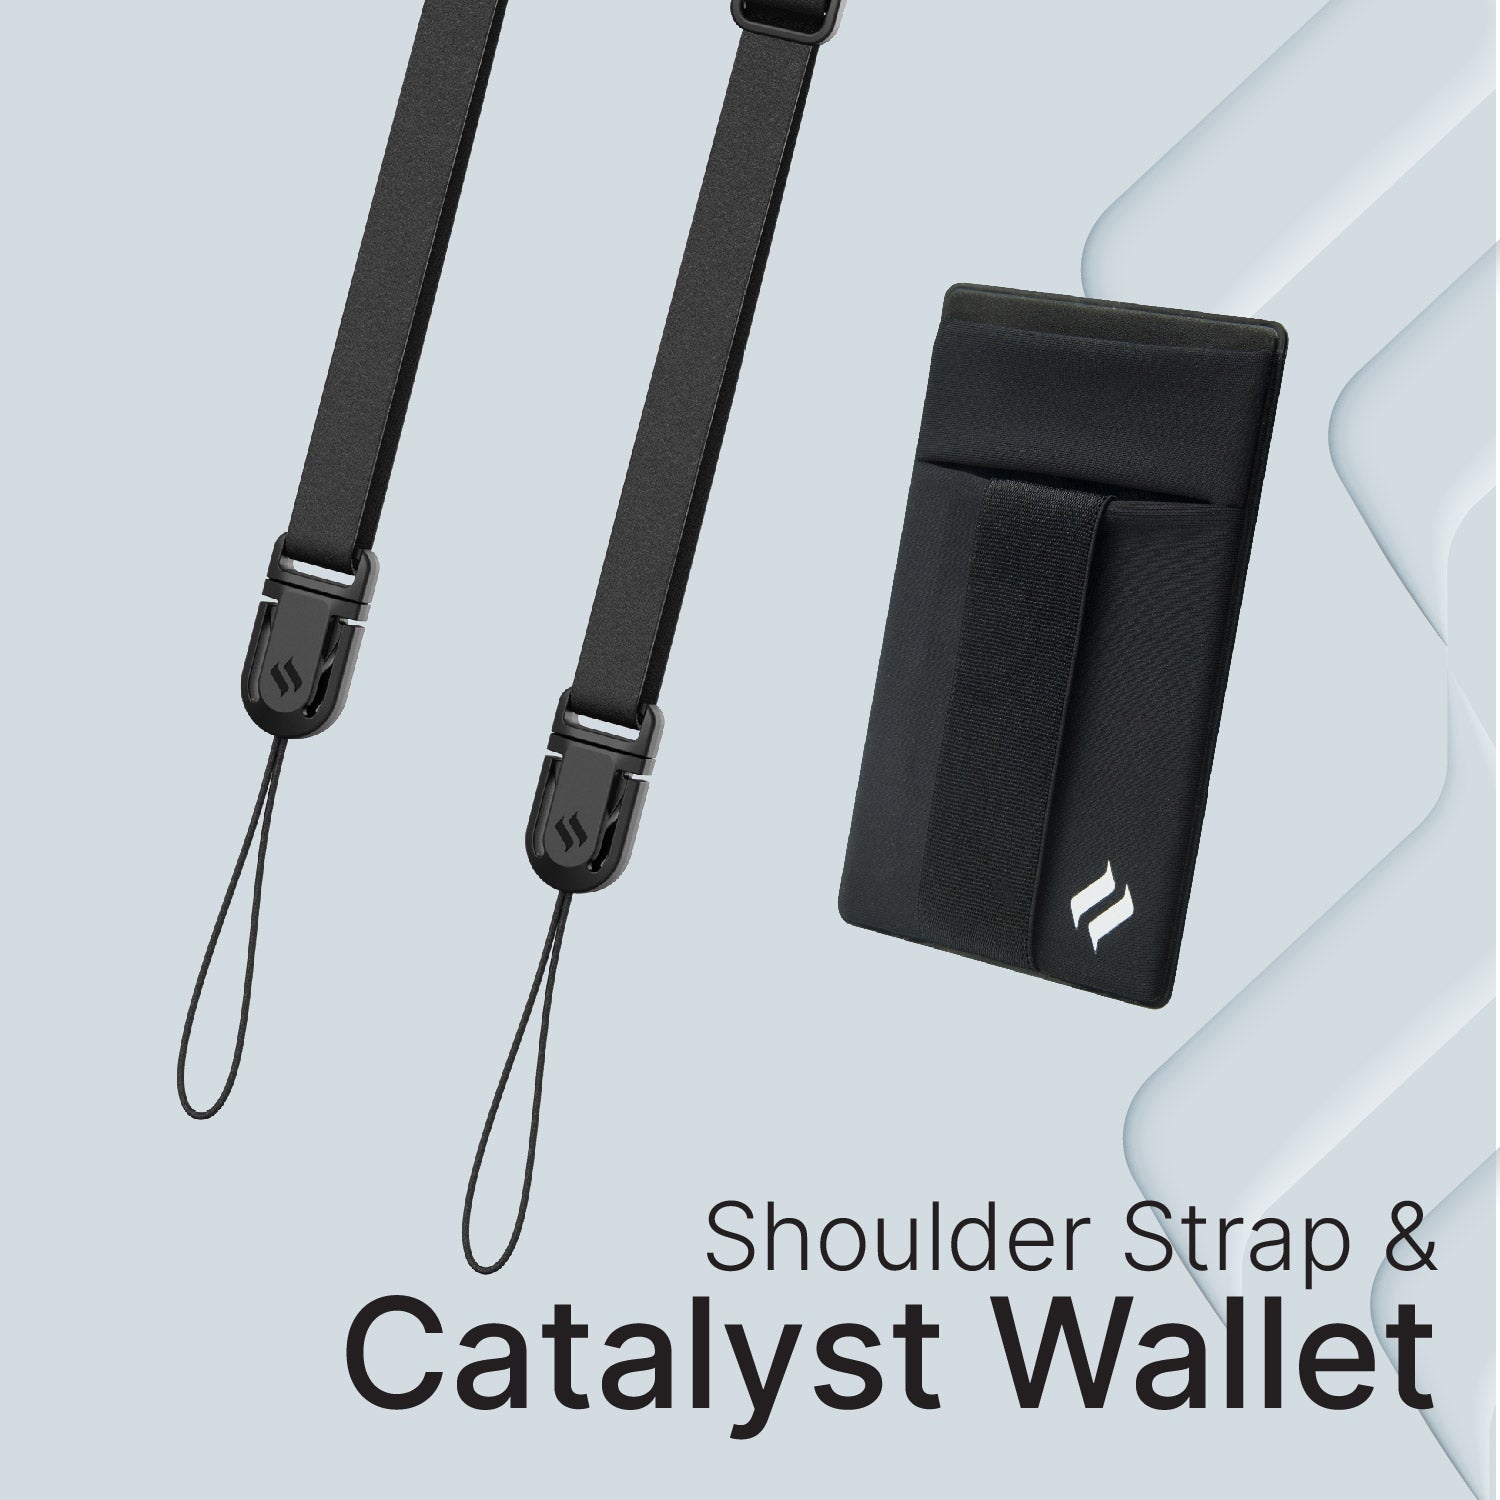 Catalyst stick on wallet and shoulder strap bundle wallet and strap picture only